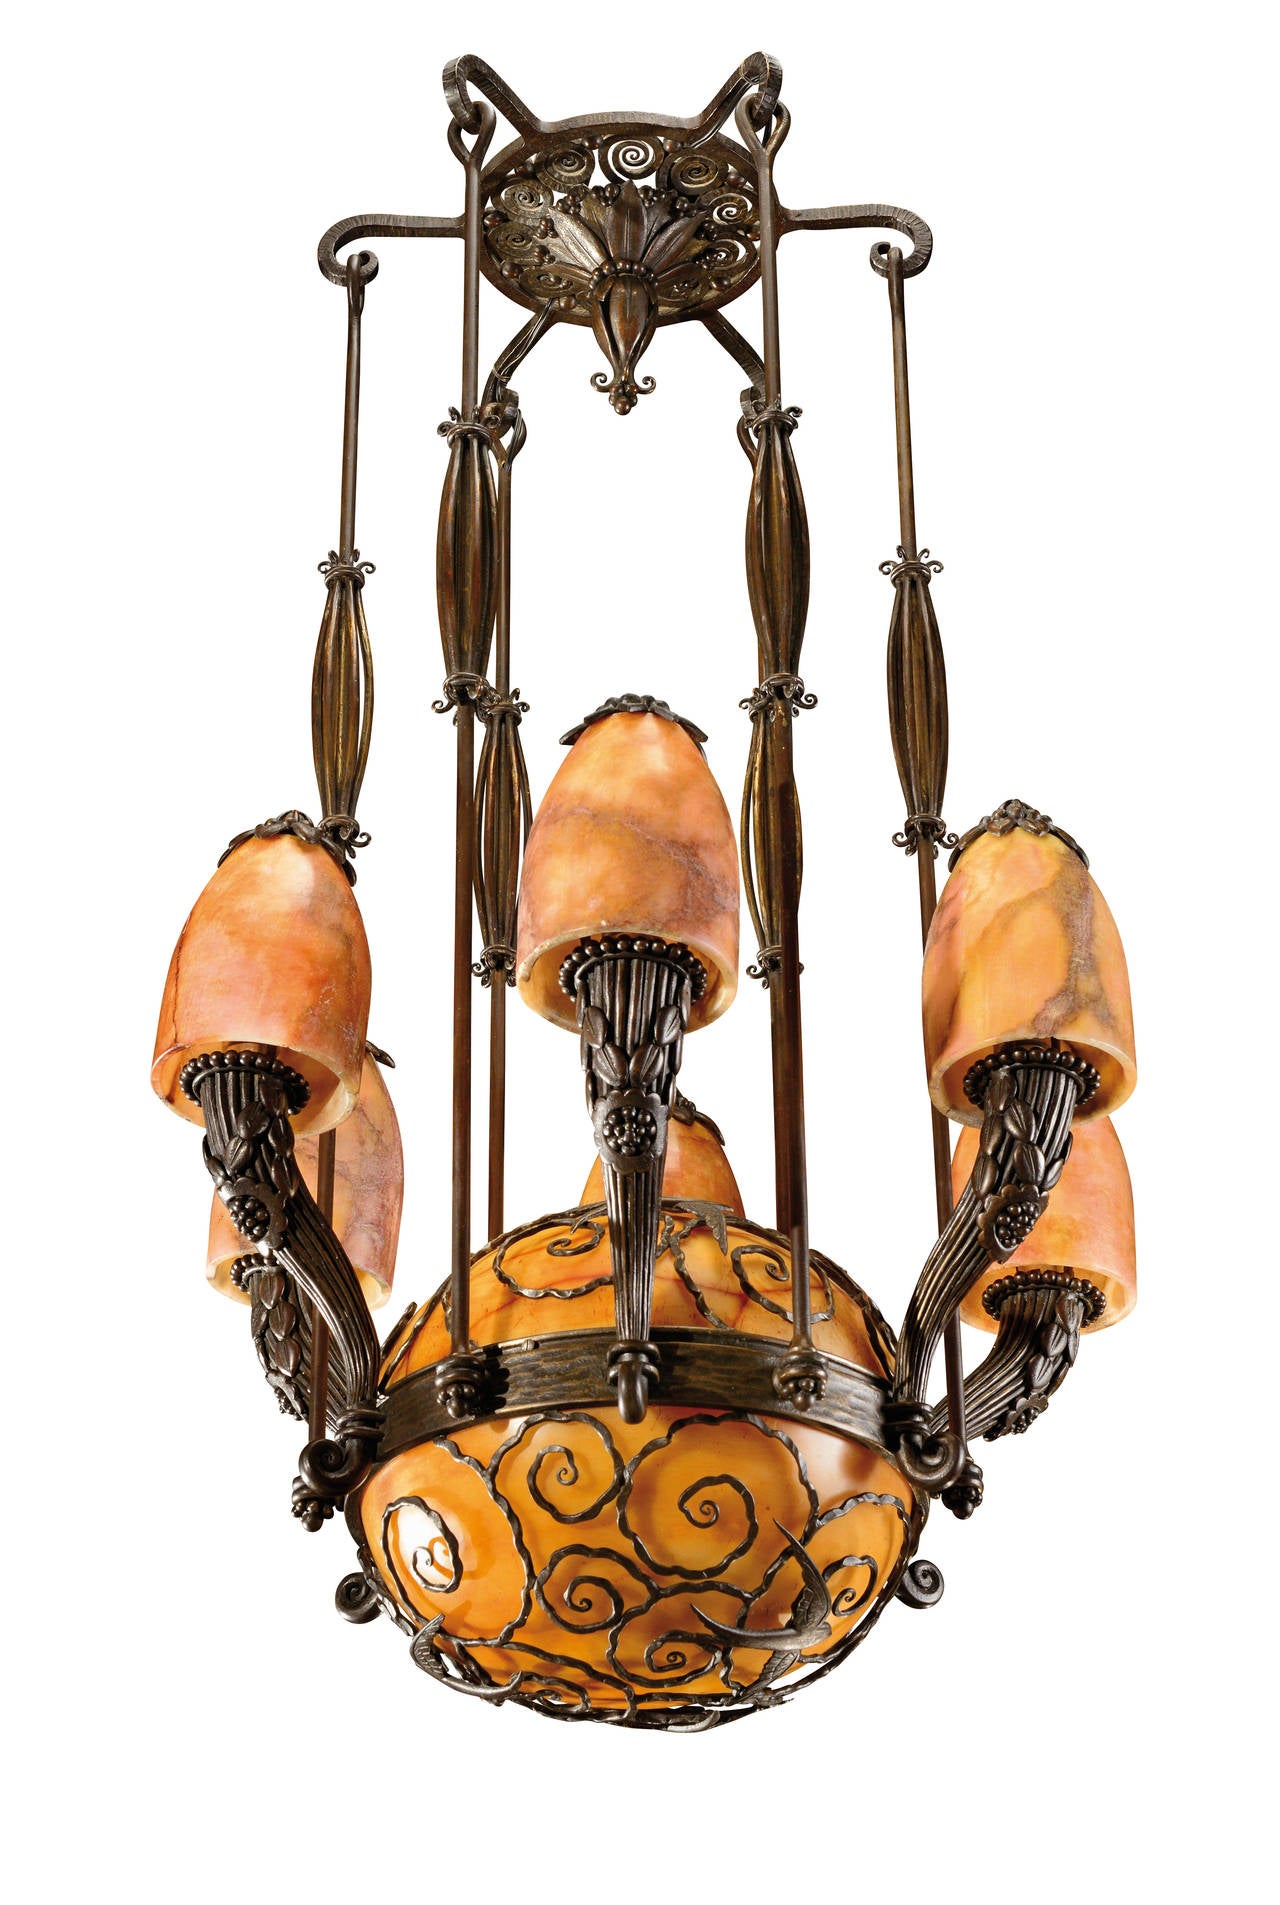 Large hammered wrought iron centre light holding a sphere and alabaster shade with six branches of lights representing horns of plenty surmounted by orange tulips.
Circa 1925.